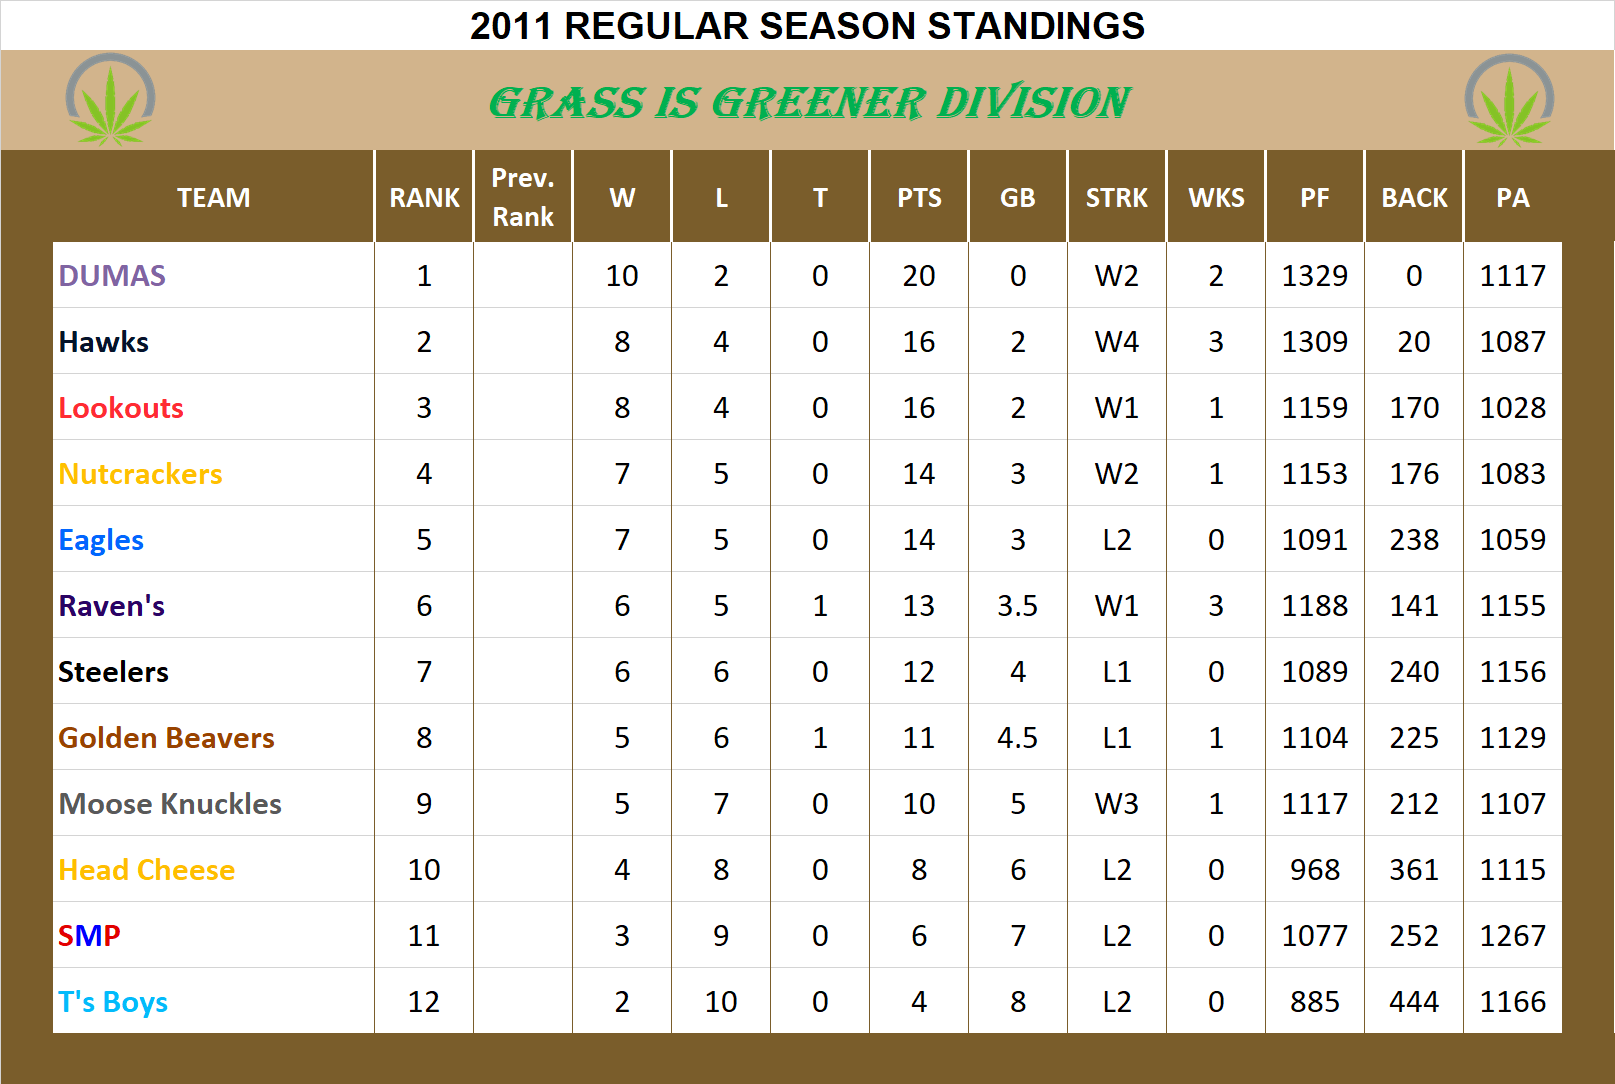 2011 Grass is Greener Division Standings